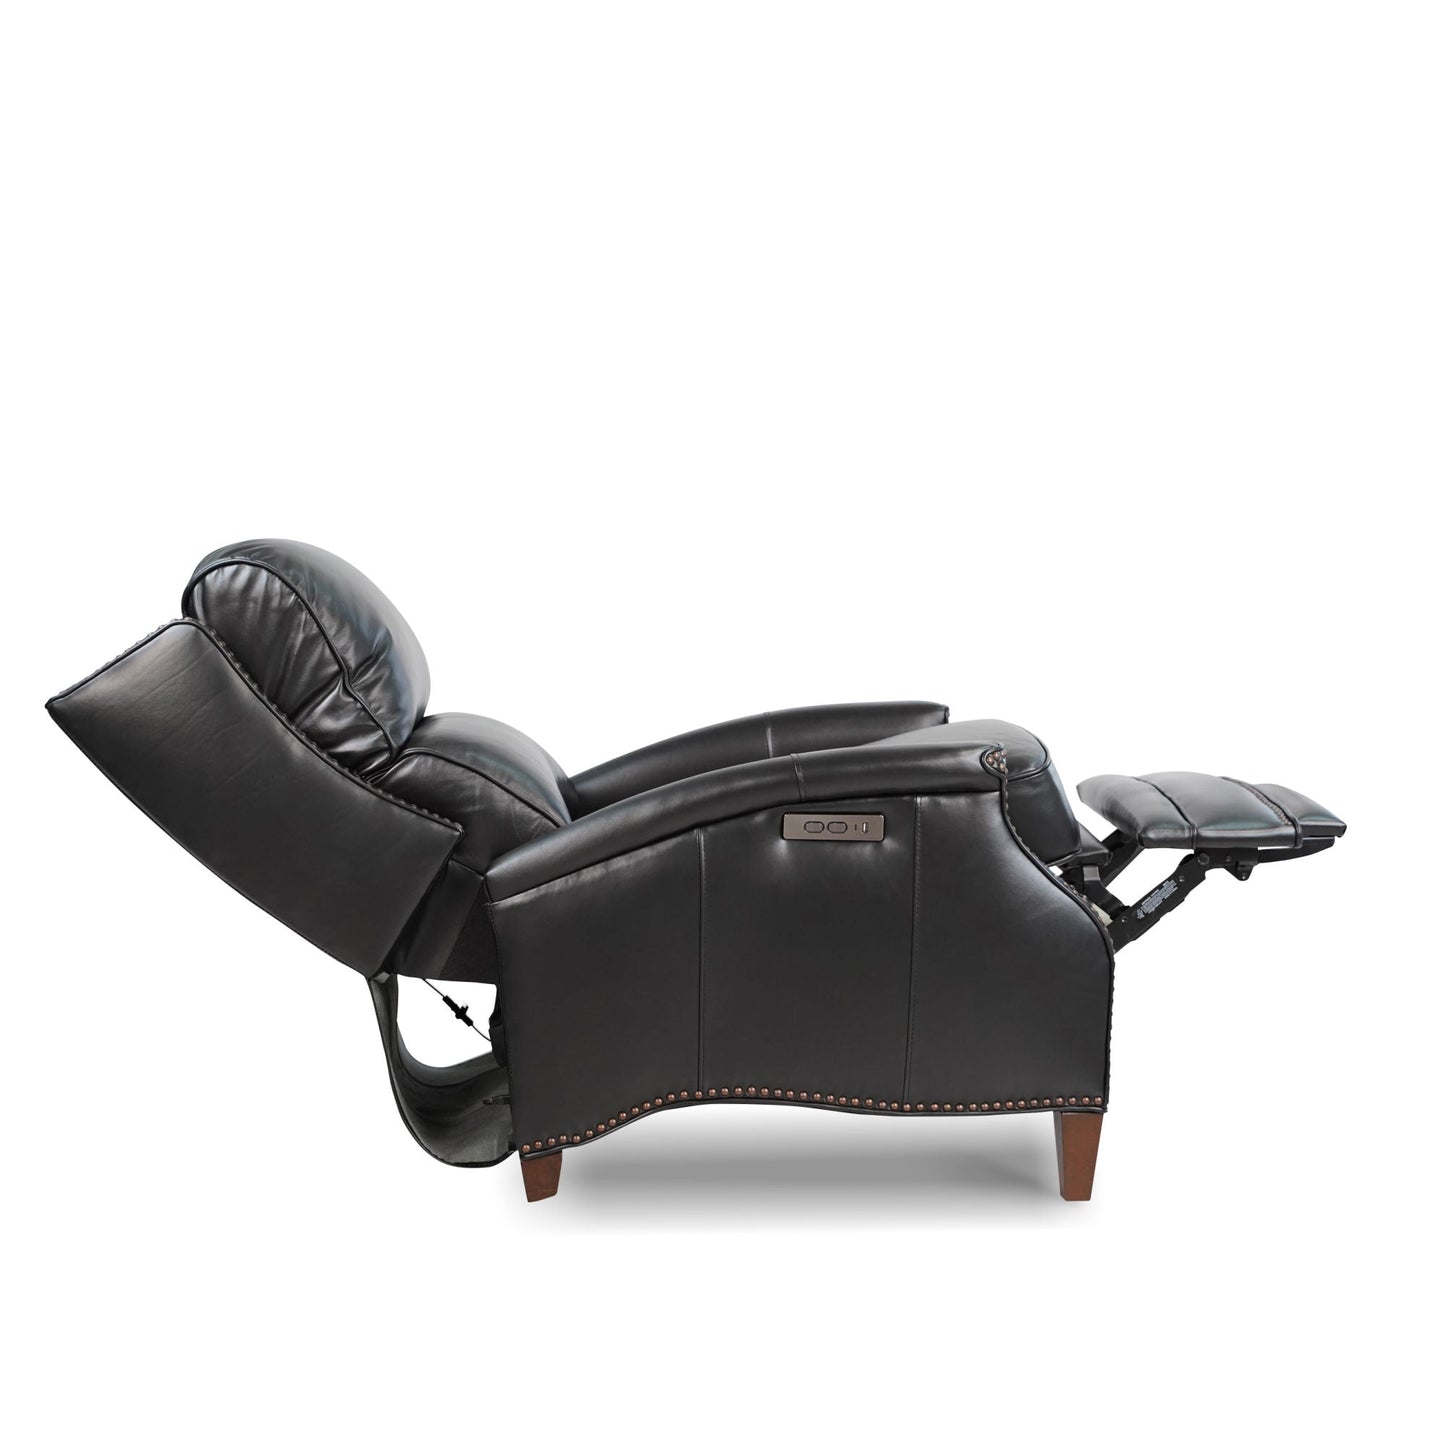 Hekkin II Genuine Top Grain Leather Power Recliner | Adjustable Headrest | Removeable Cushion | Nailhead Trim | Extendable Footboard Home Decor by Design